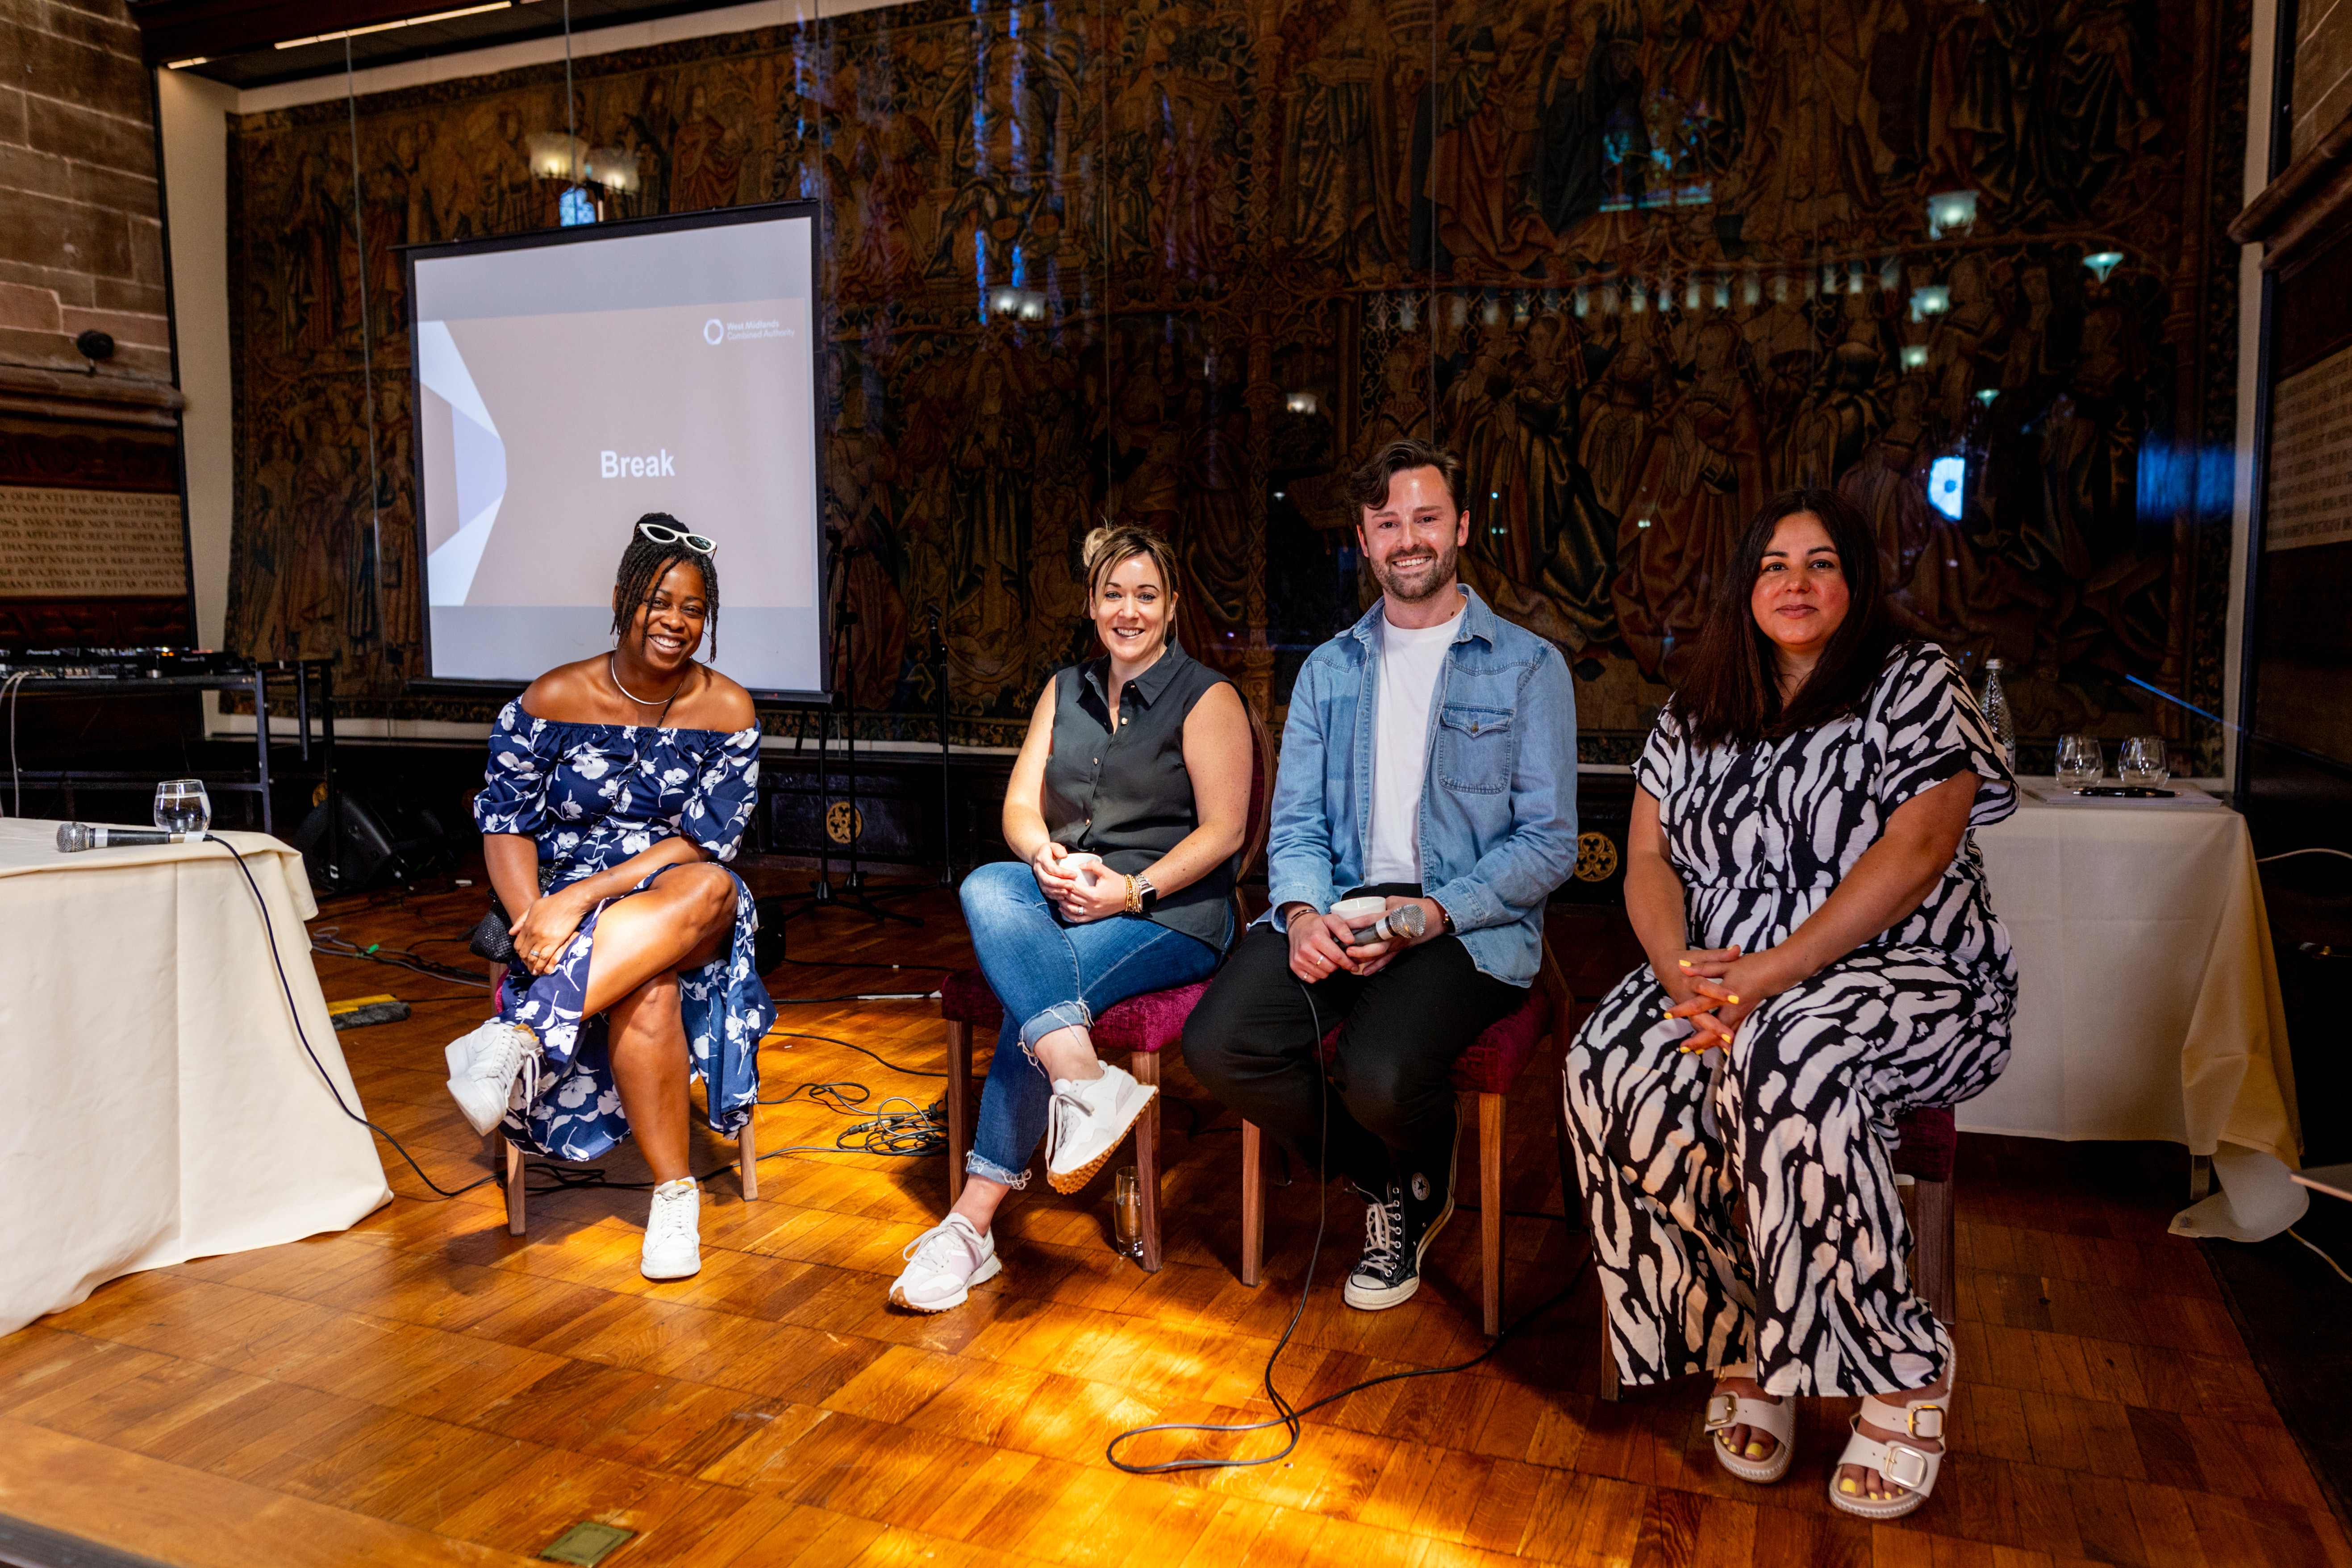 The launch of WMCA's Activate programme at St Mary's Guild Hall in Coventry included a panel discussion featuring Nyasha Daley and Amy Dalton-Hardy, who are members of the West Midlands Cultural Leadership Board, and fellow freelancers Jamie Wright and Navkiran Mann.